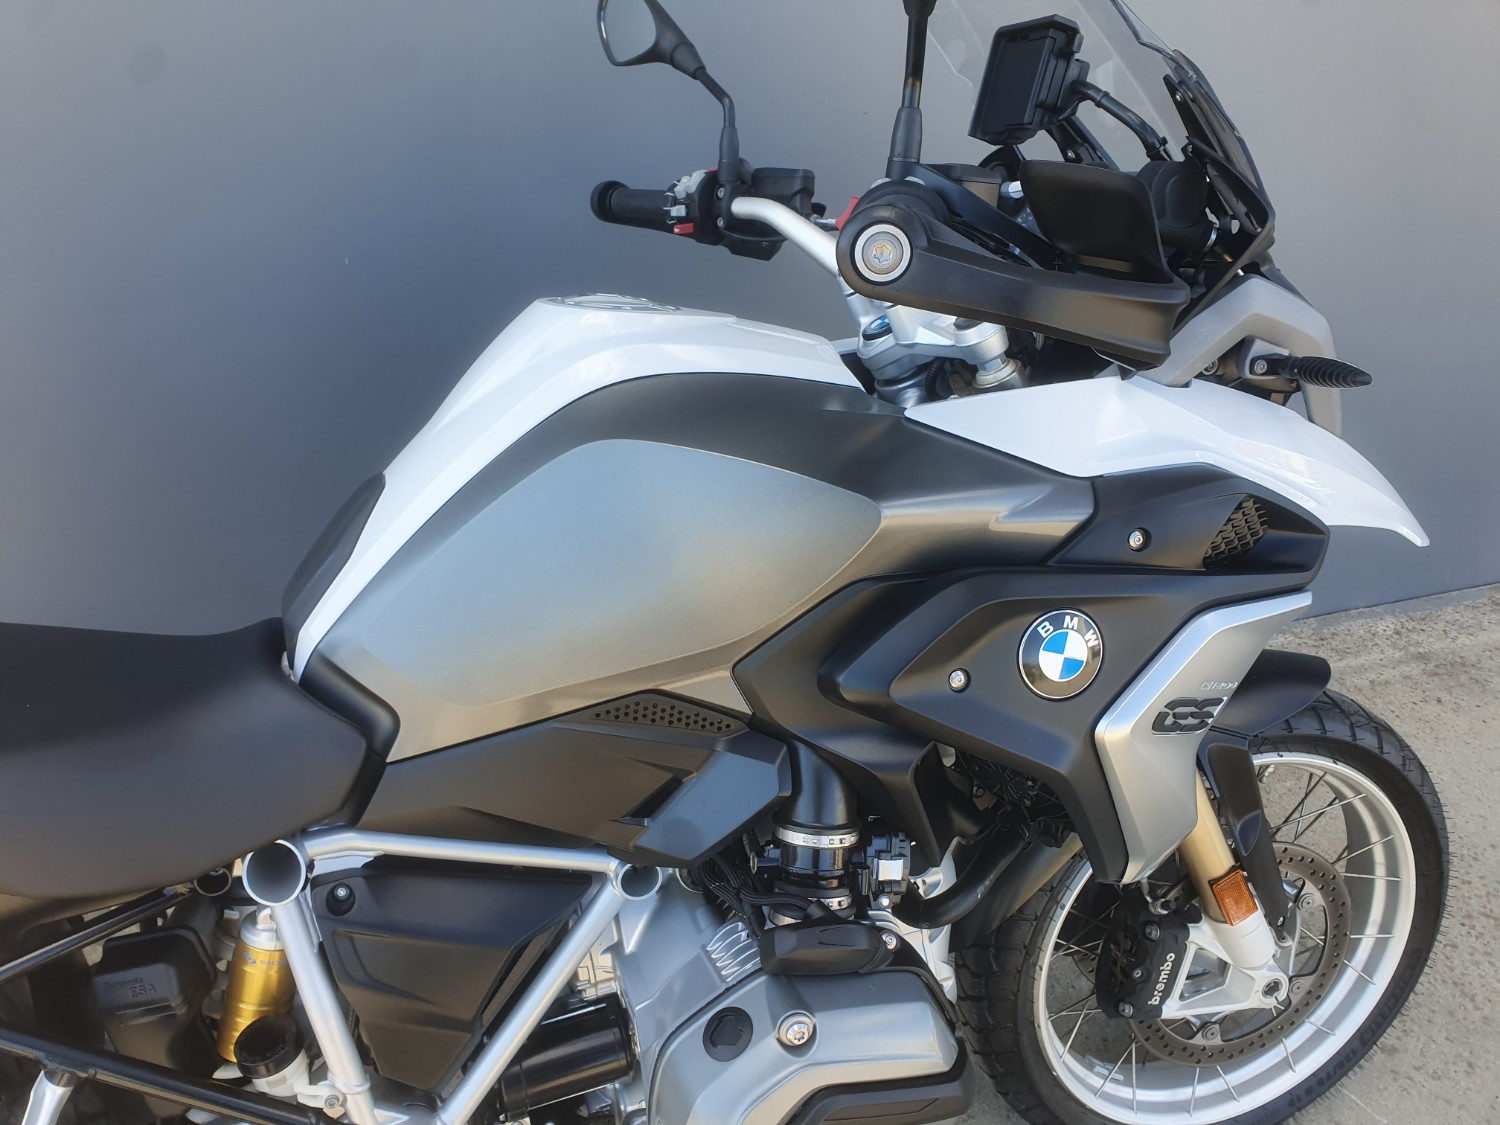 2017 BMW R 1200 GS Motorcycle Image 11